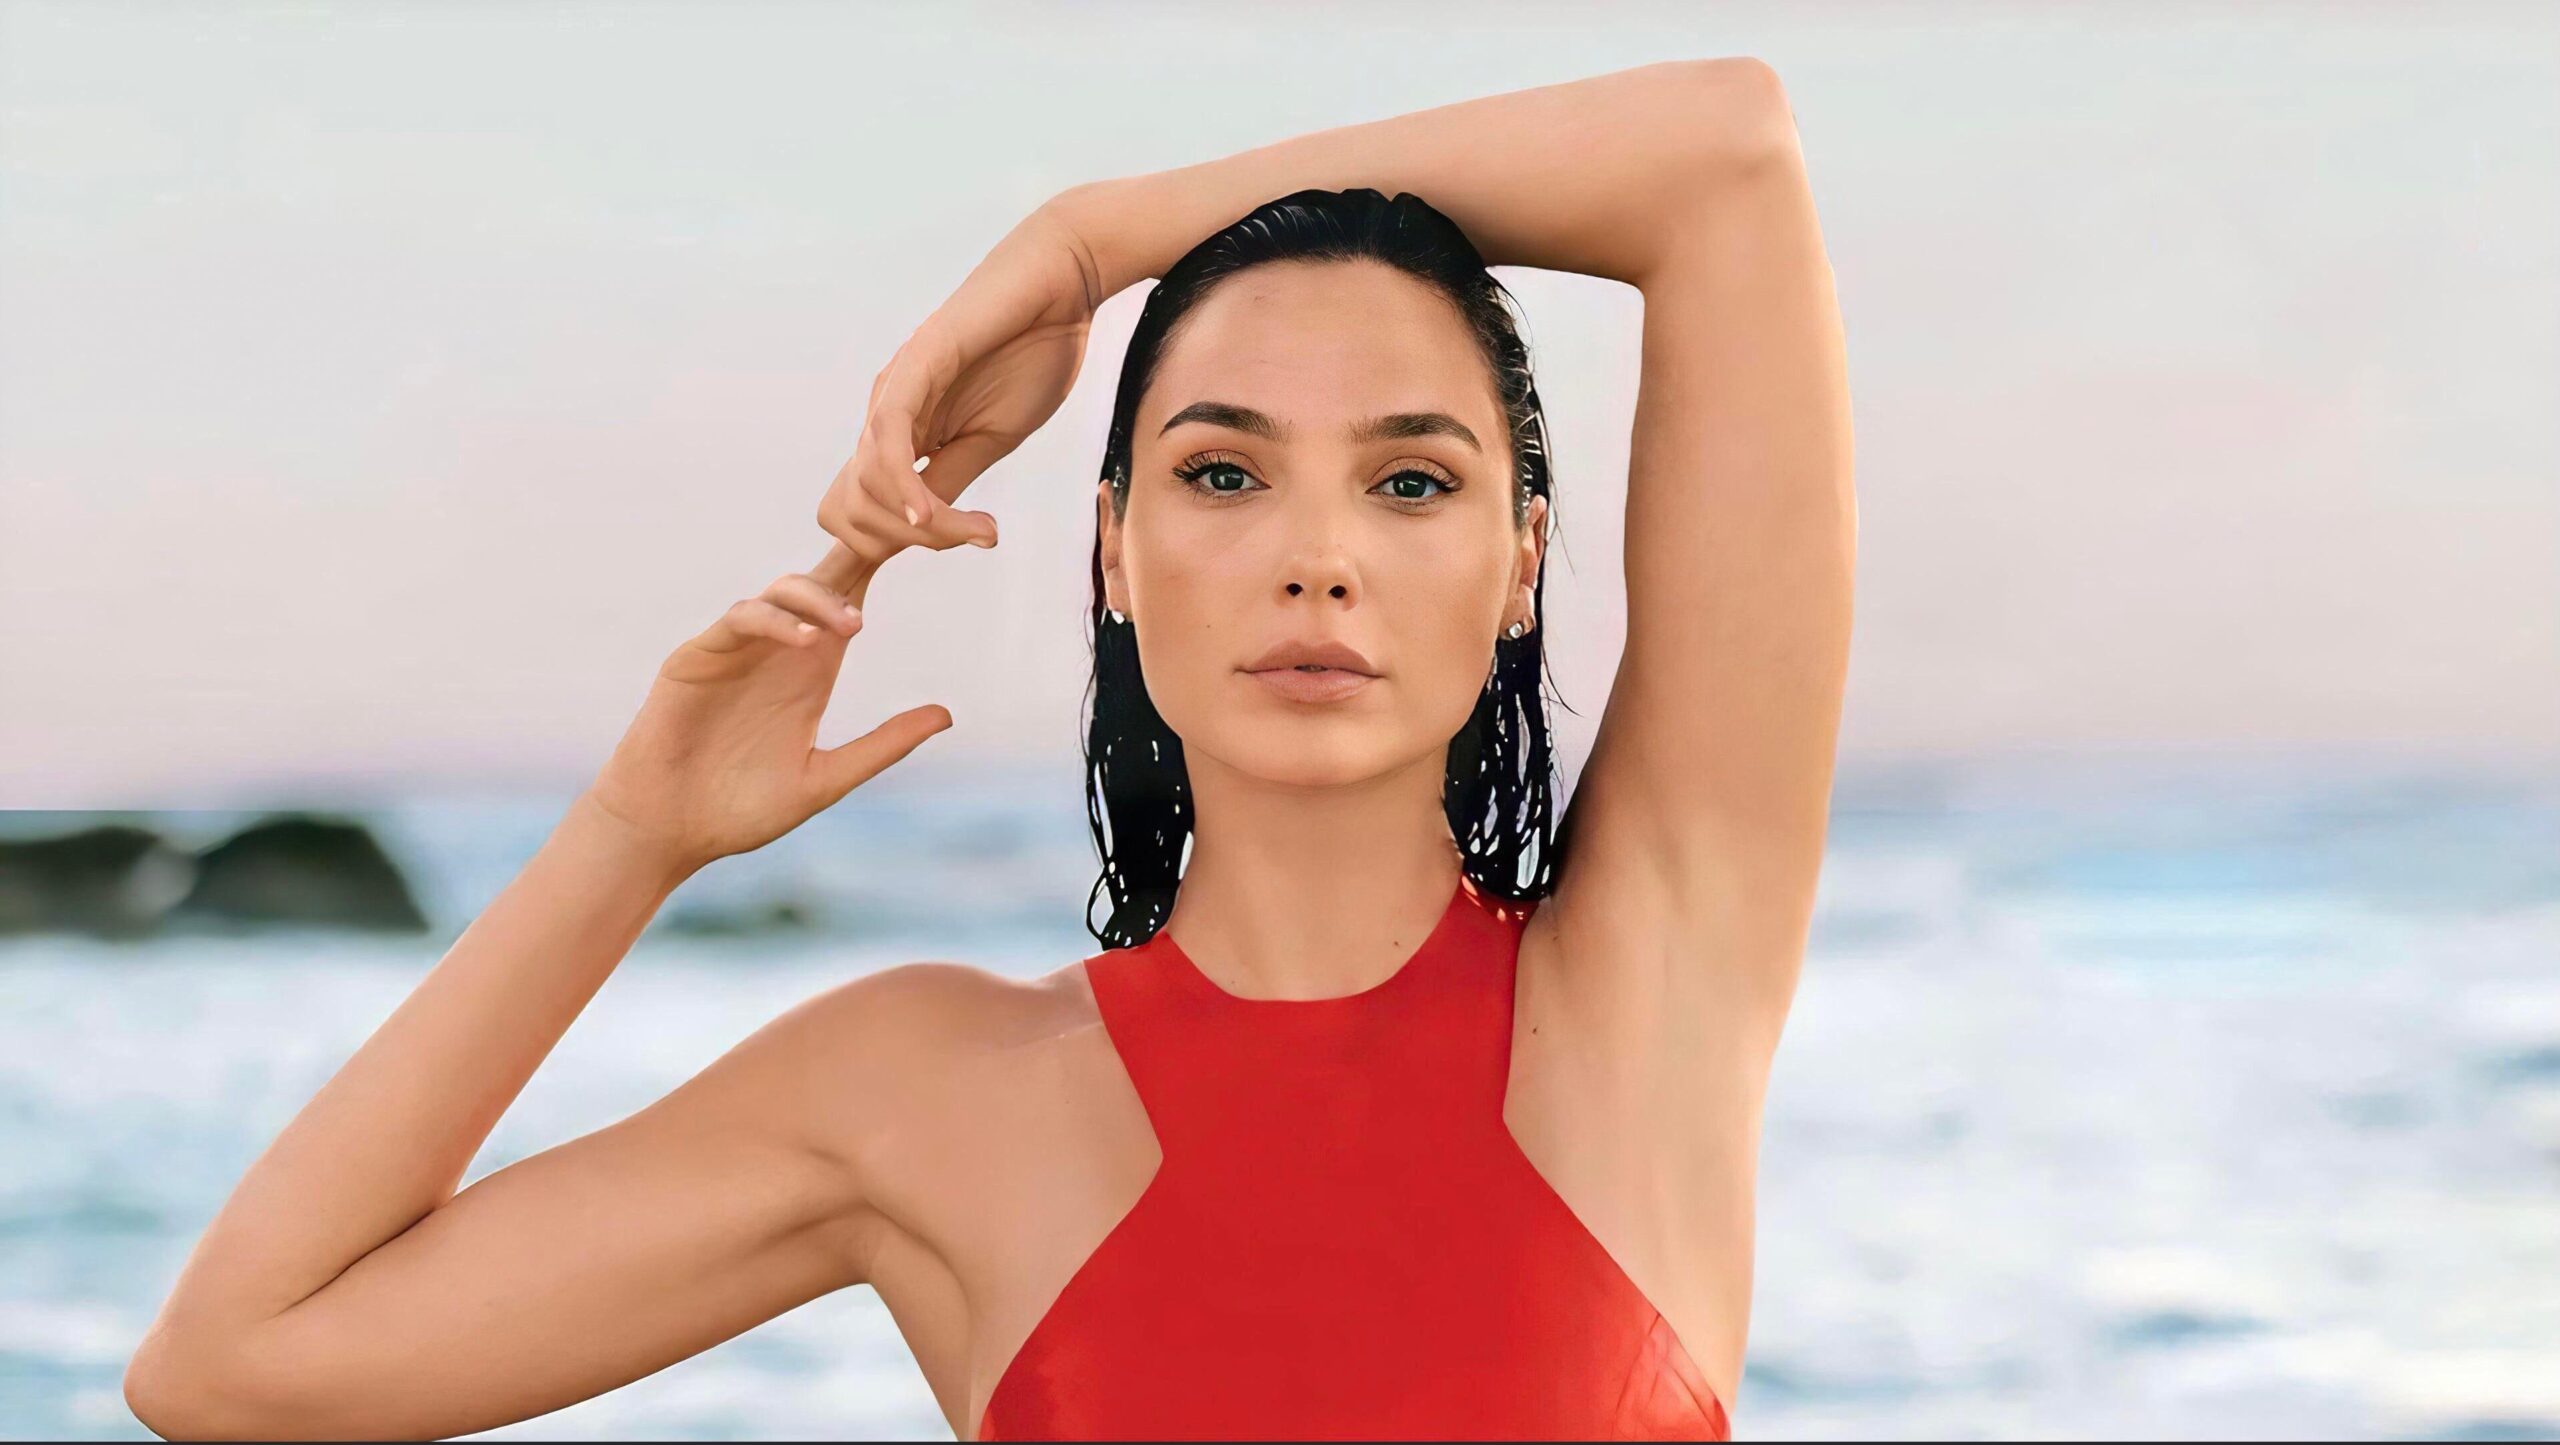 I want Gal Gadot to dominate me so fucking much